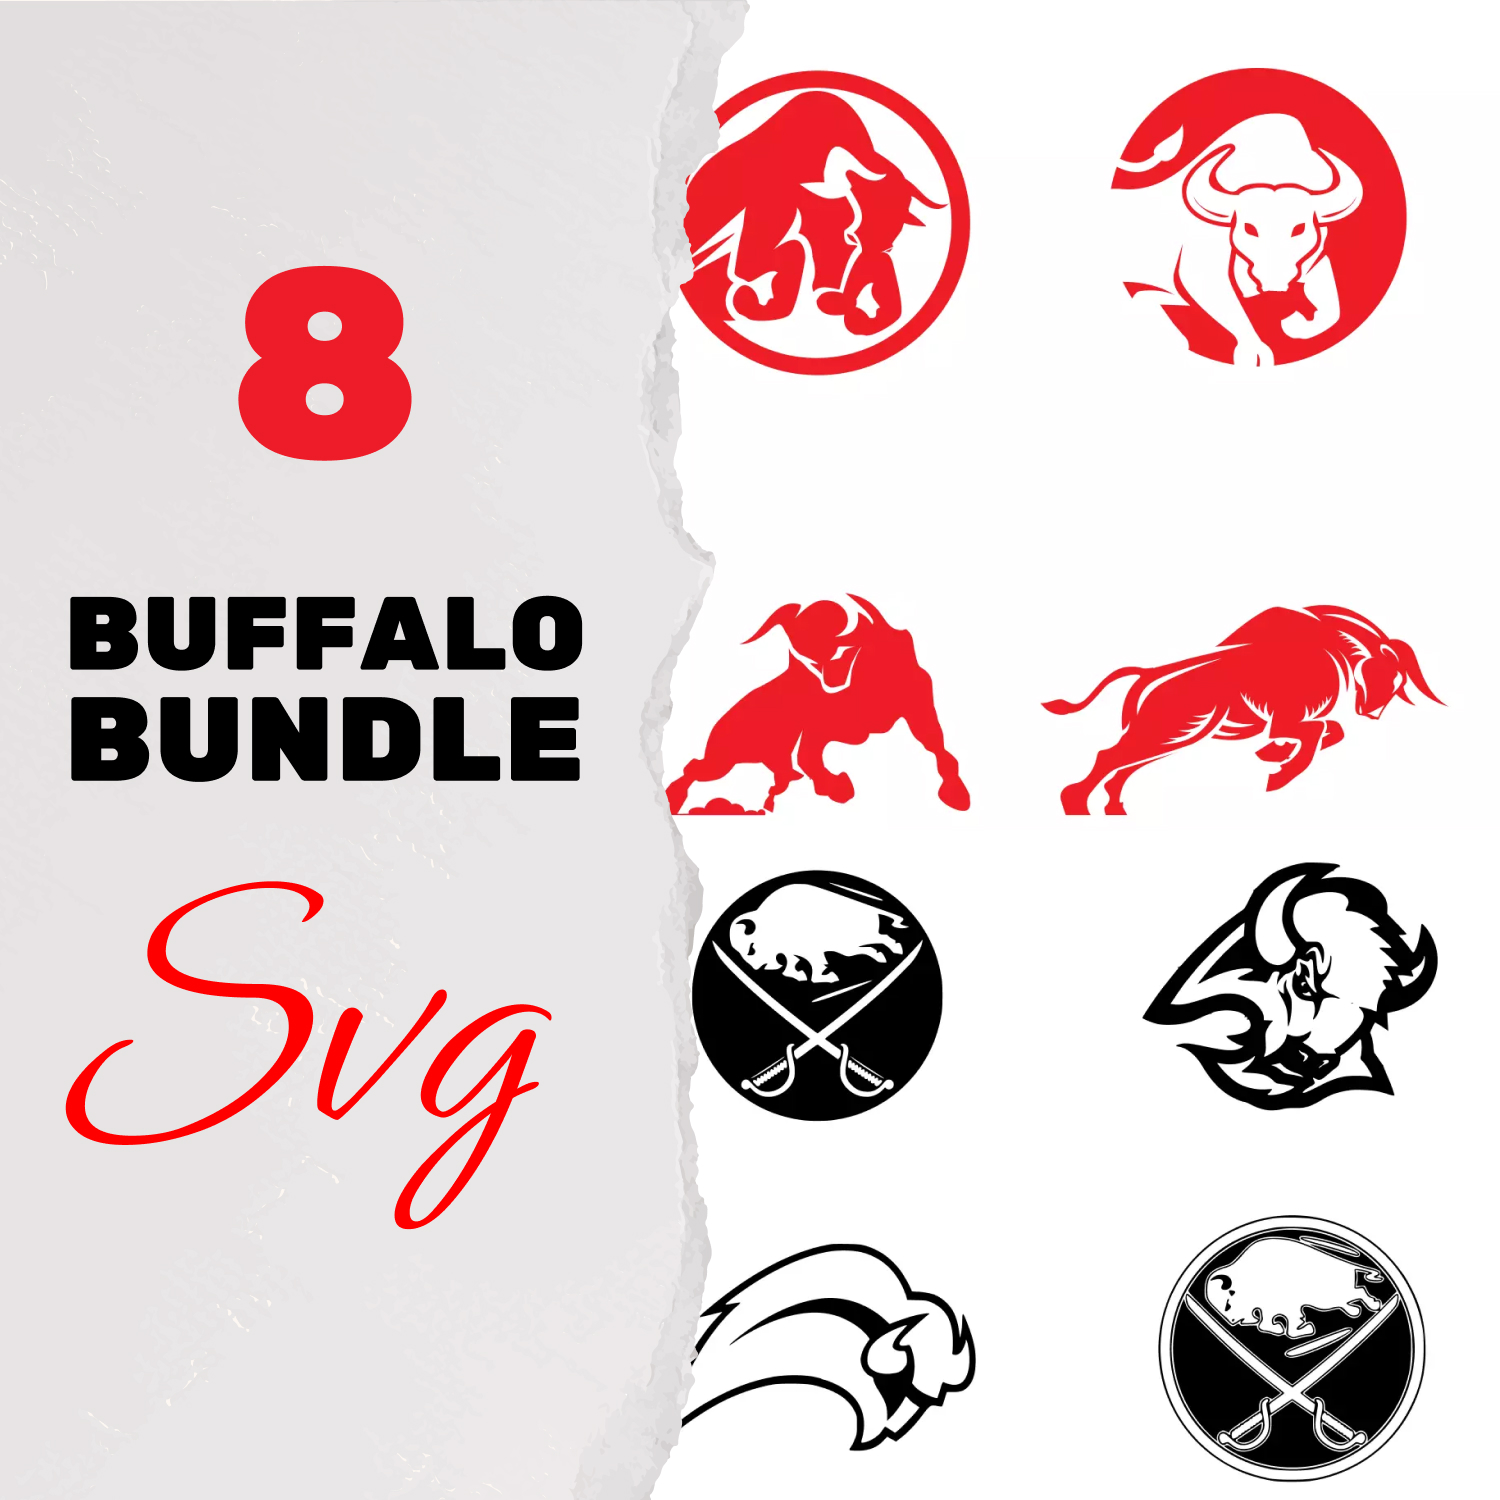 Bunch of buffalo logos on a piece of paper.